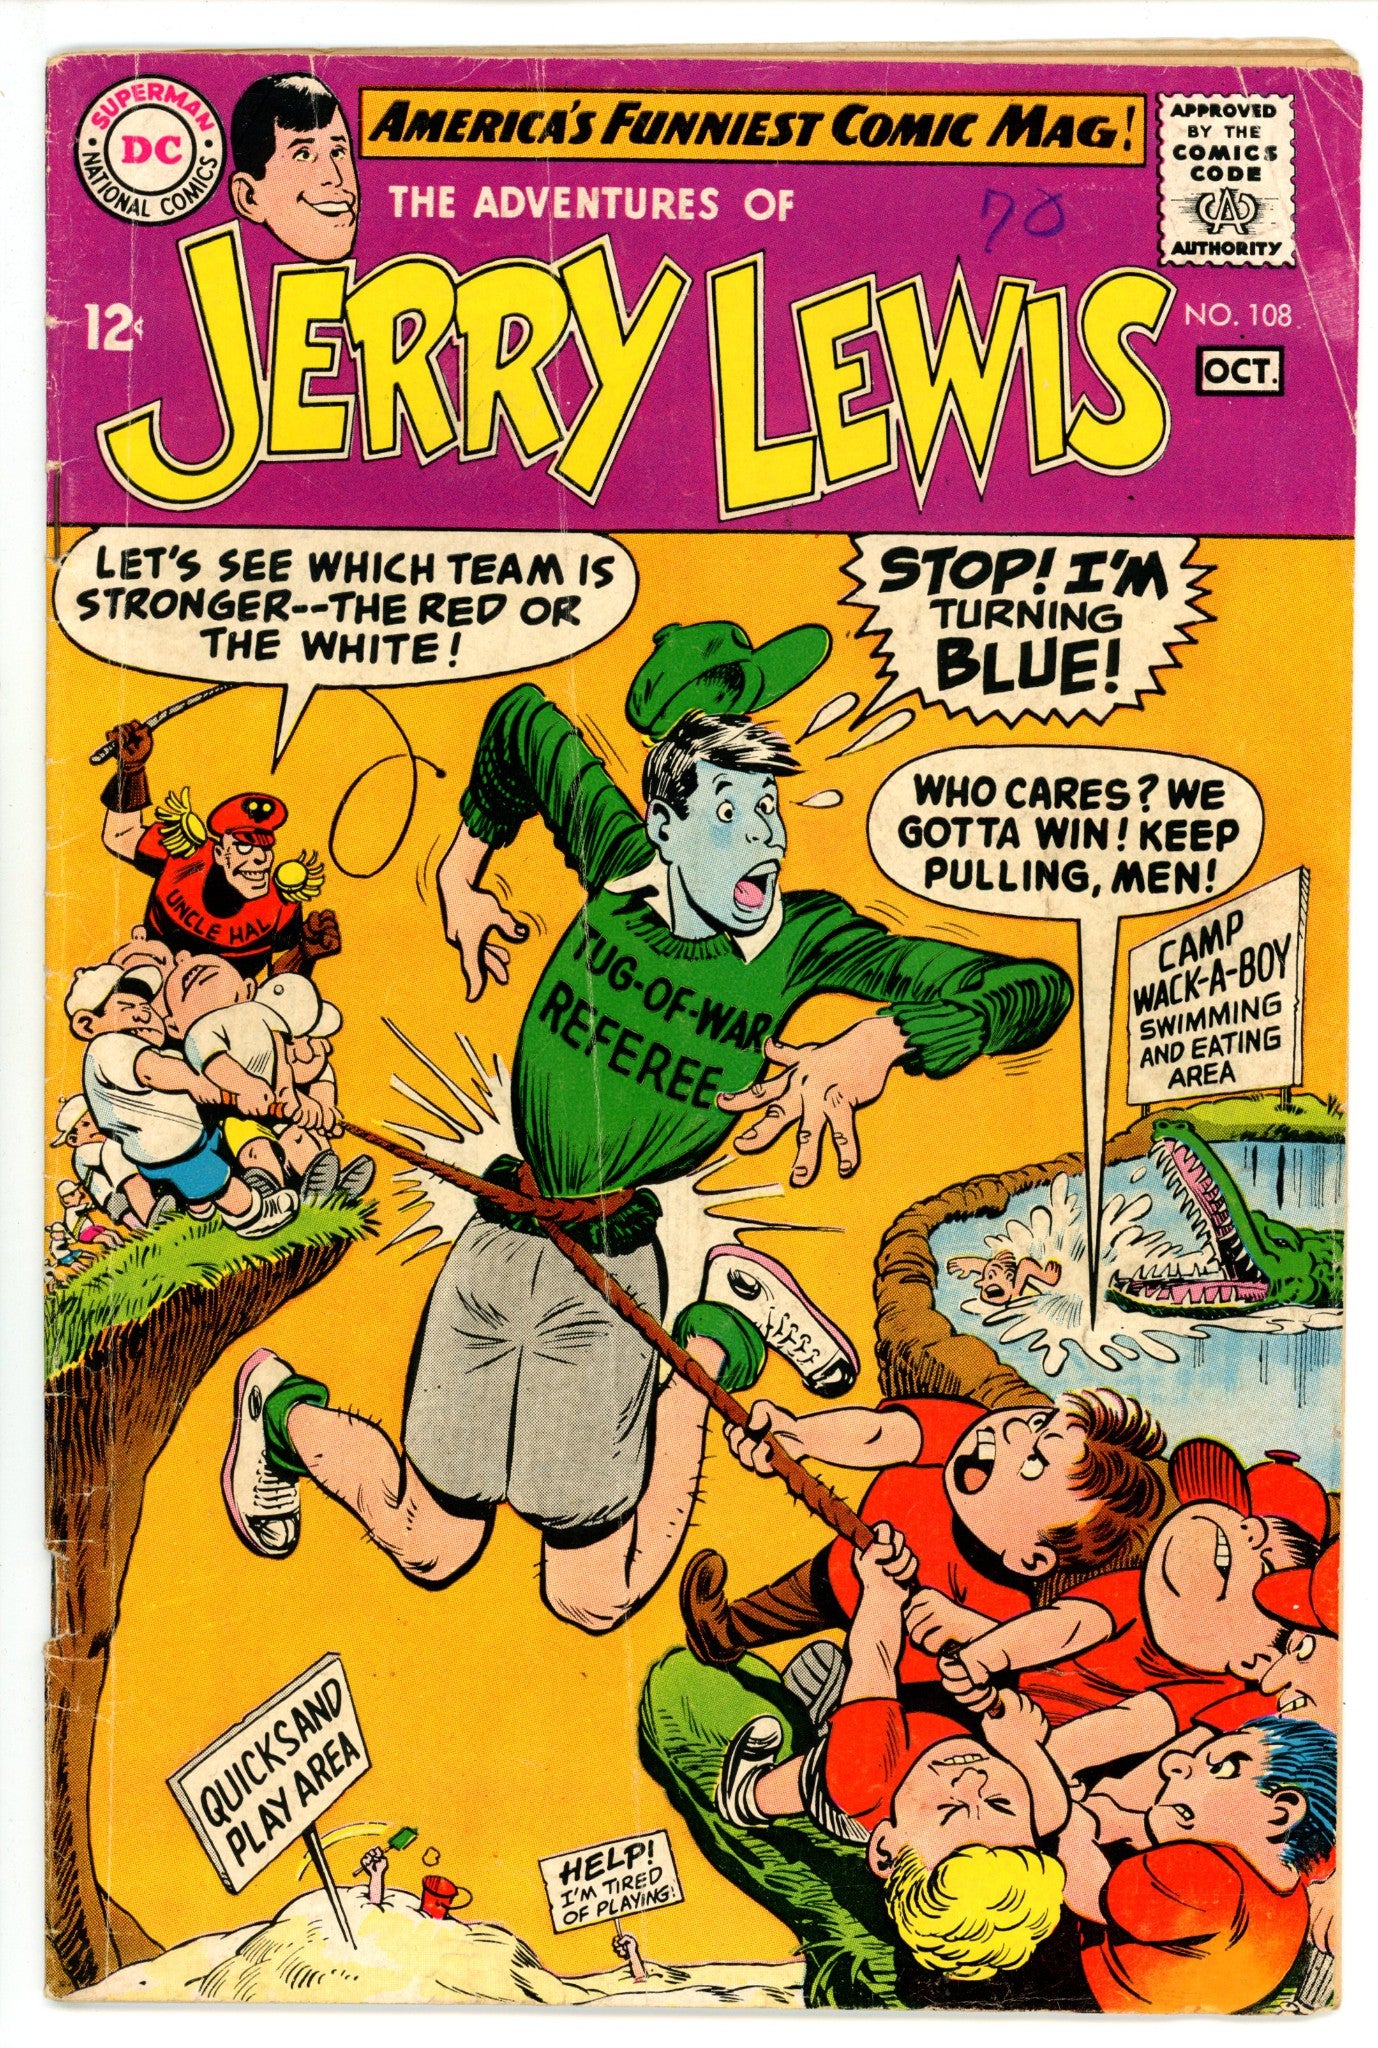 The Adventures of Jerry Lewis 108 VG (4.0) (1968) 